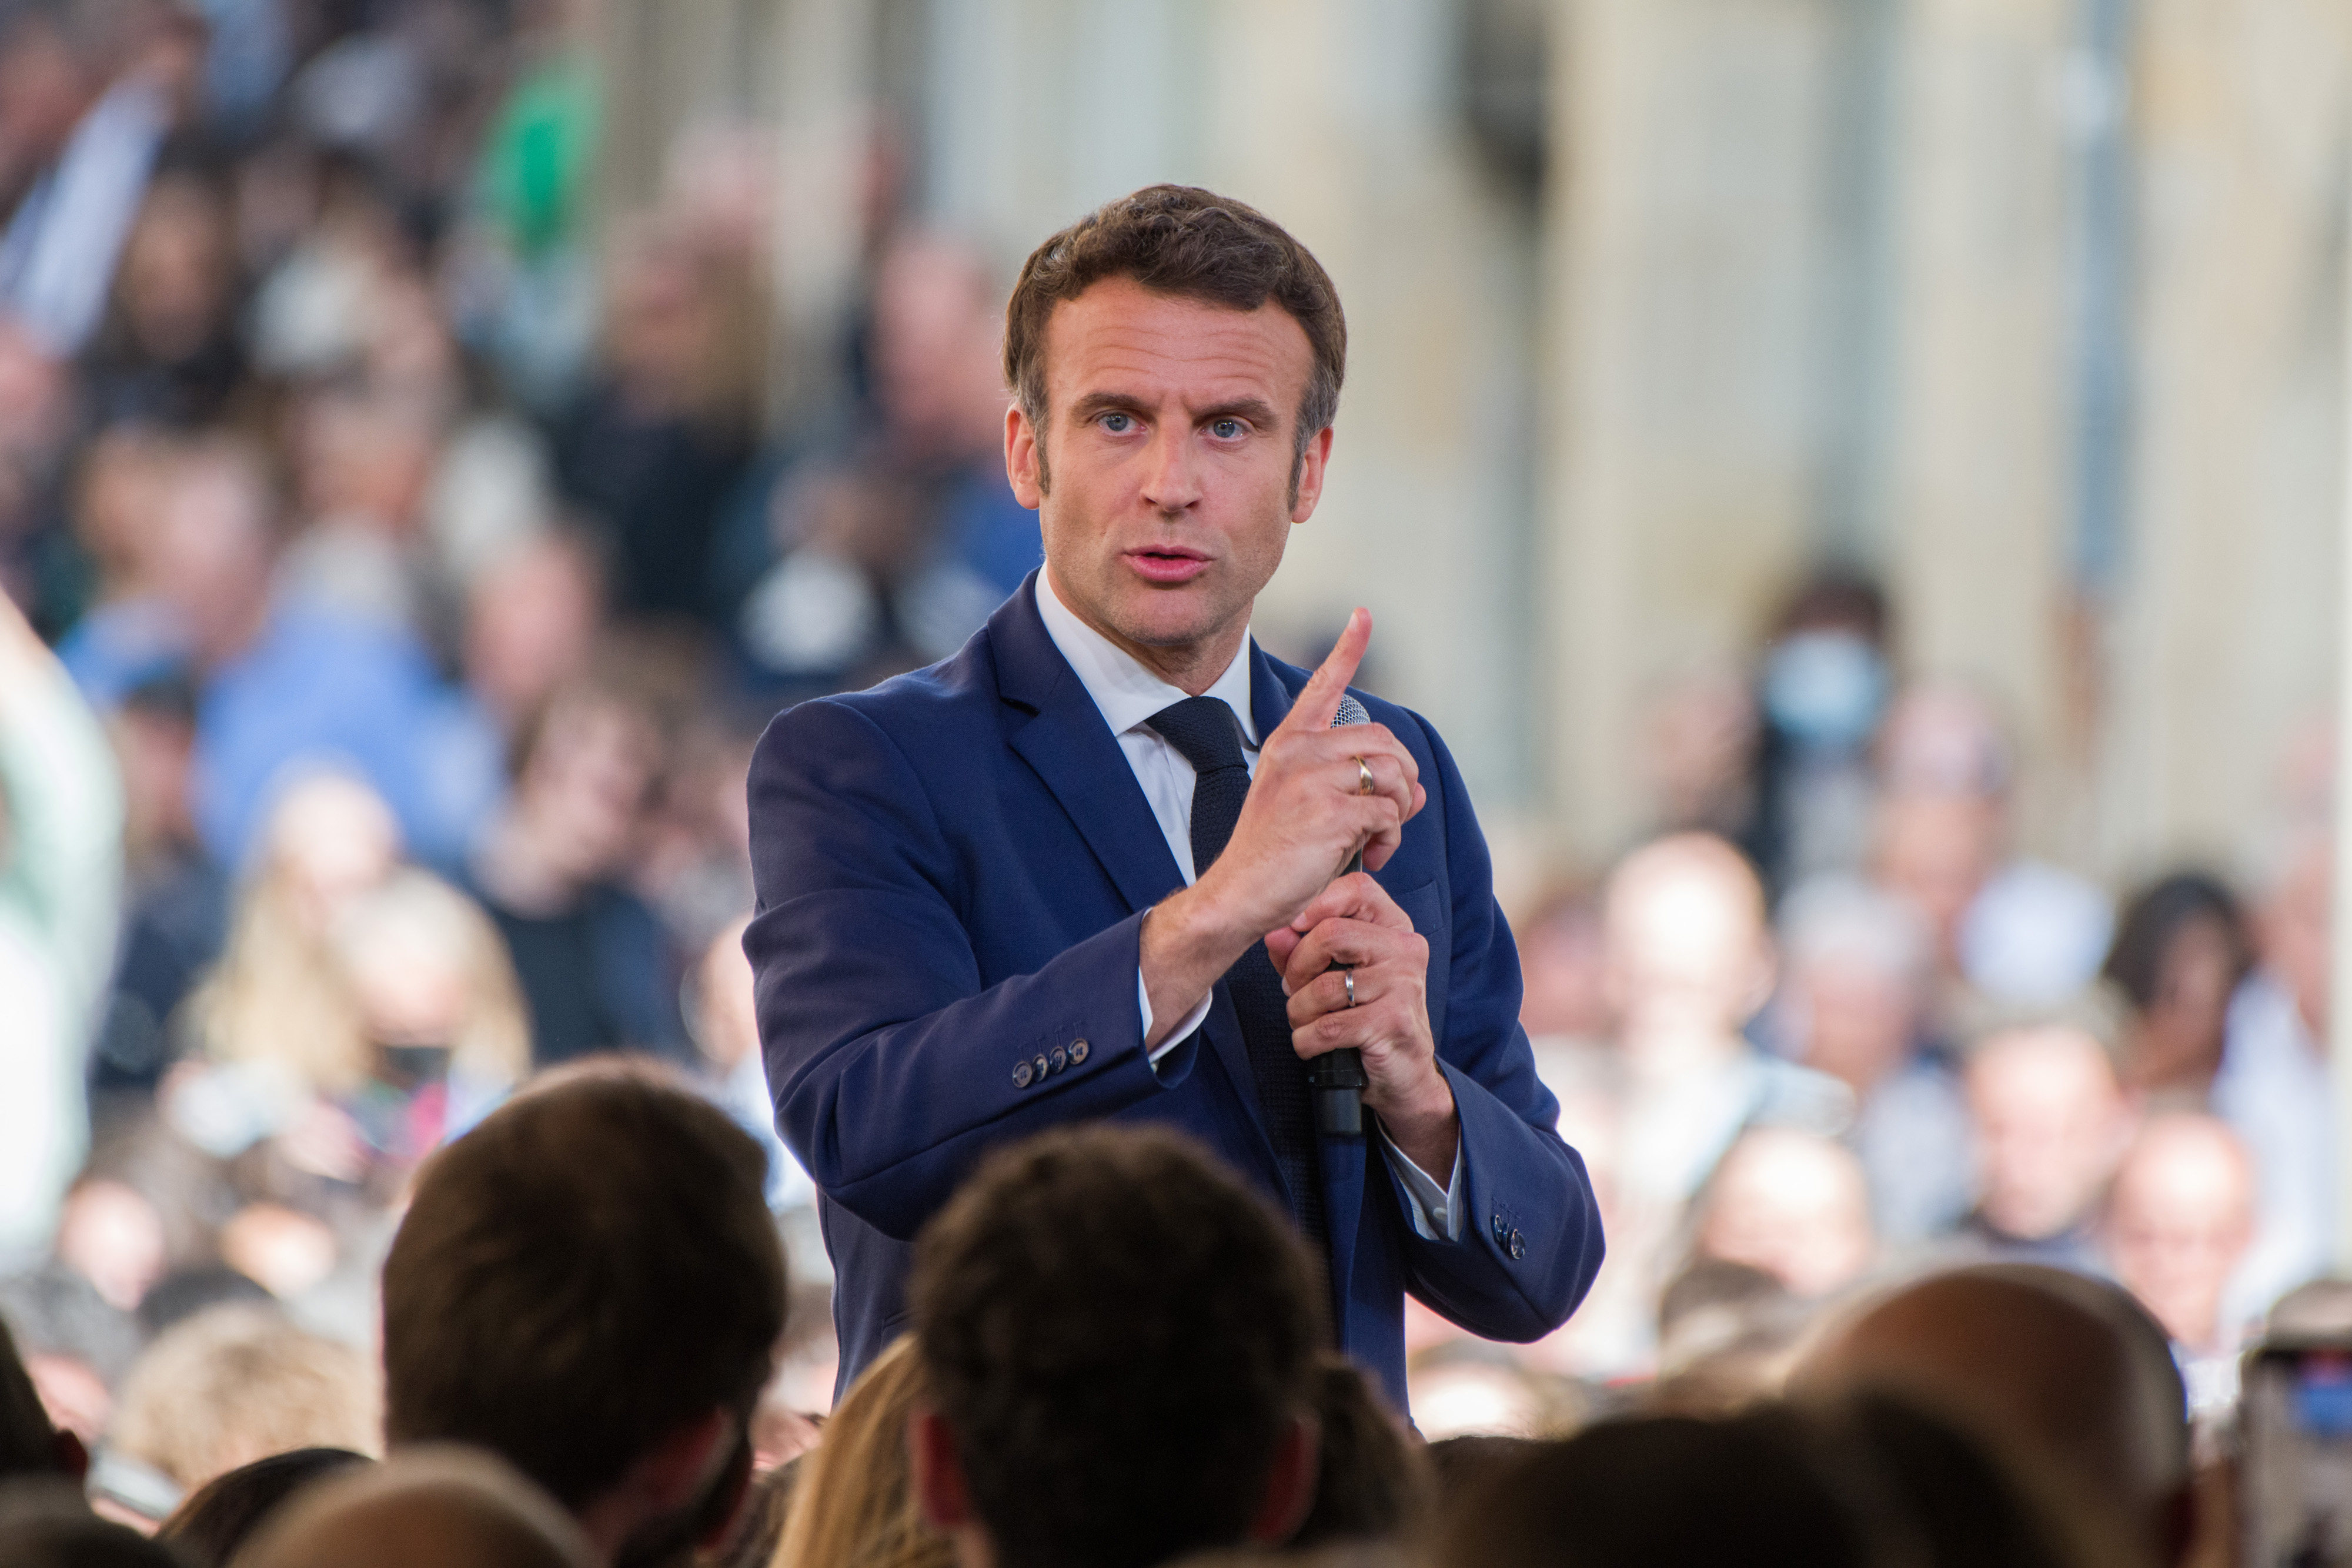 French President Emmanuel Macron speaks to supporters during his final campaign speech in Figeac, France on Friday. Photo: Bloomberg